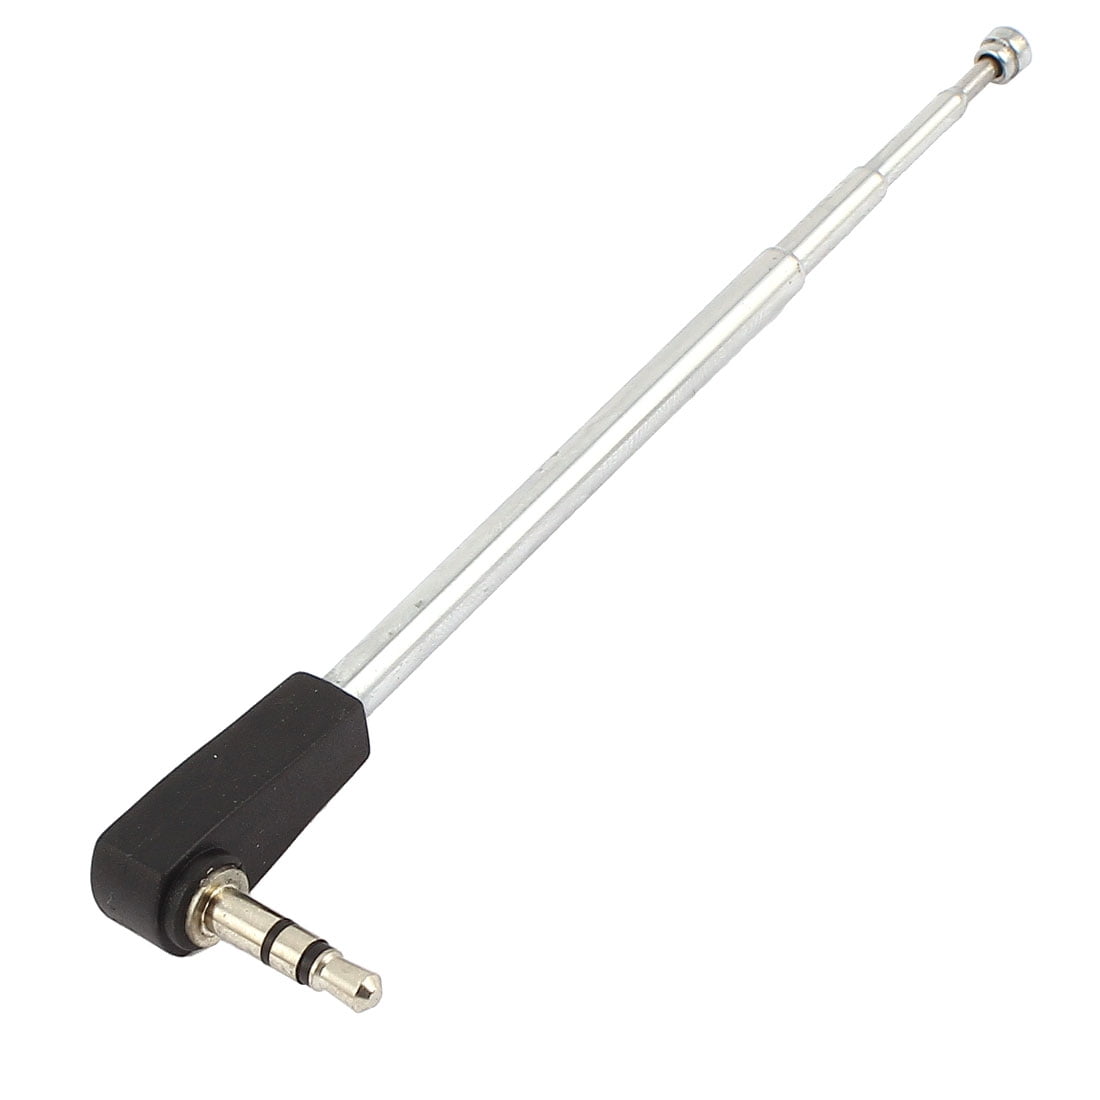 225mm 4 Section Telescoping Antenna 3.5mm Male FM Radio Antenna for Mobile Cell 